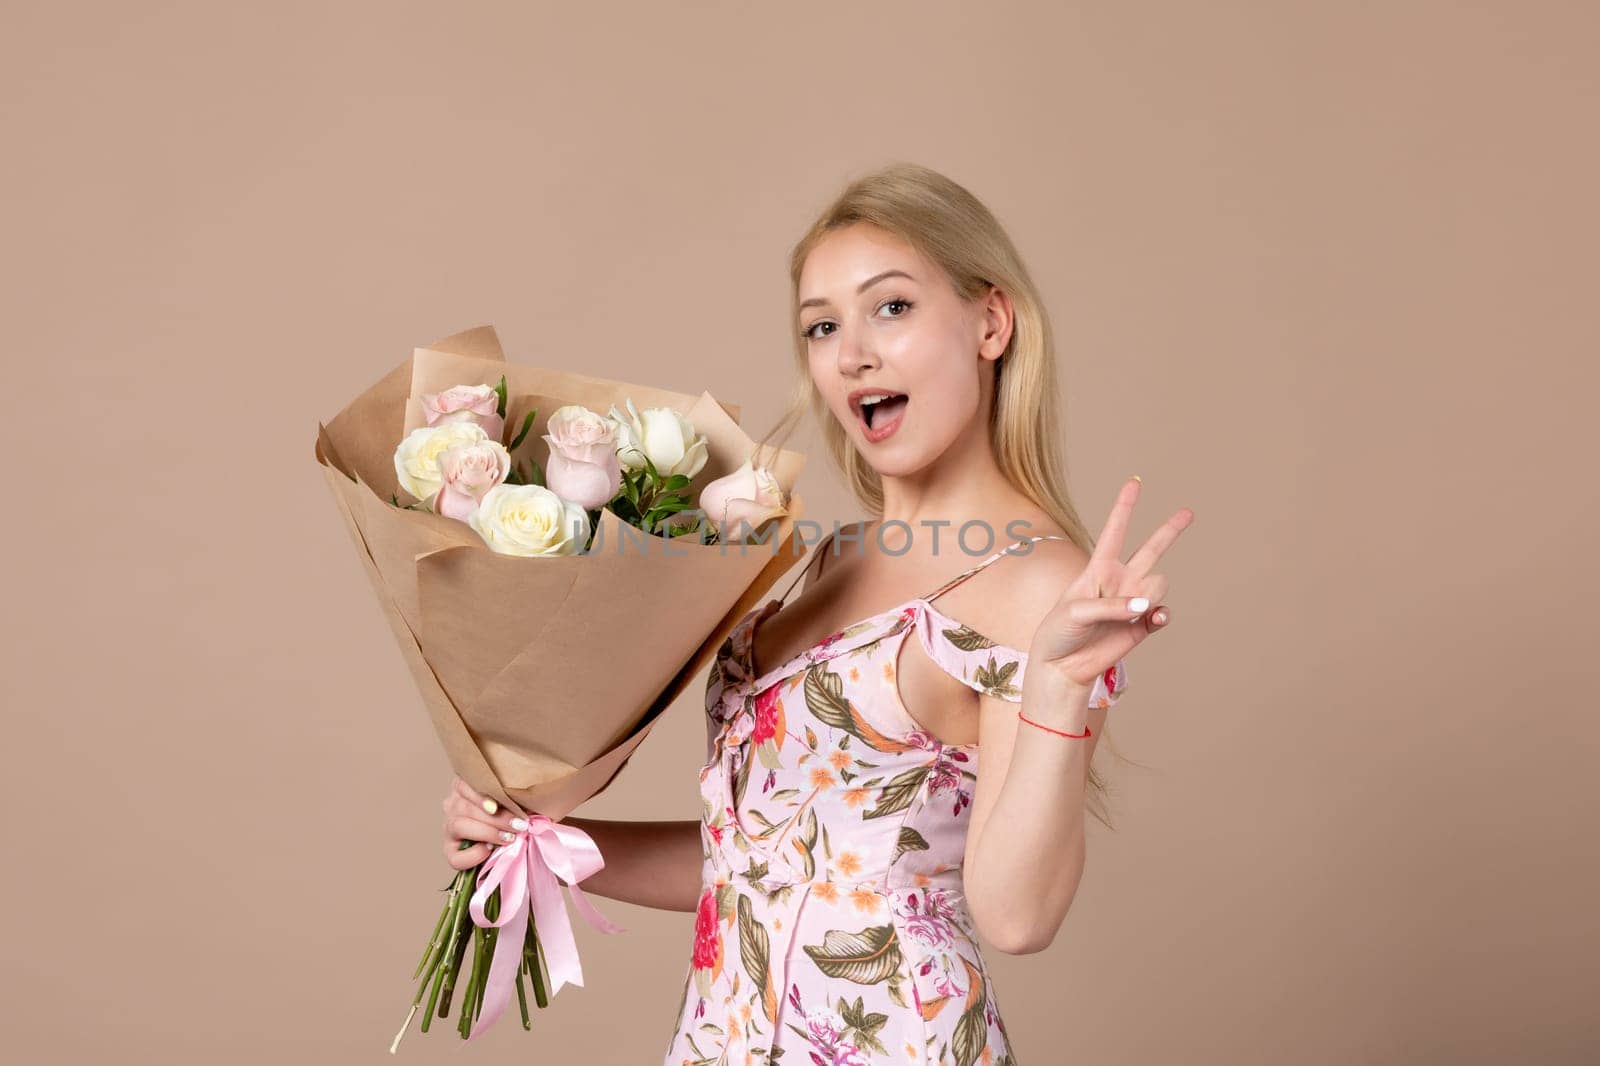 front view young female posing with bouquet of beautiful roses on brown background feminine sensual woman horizontal march gifts marriage equality by Kamran